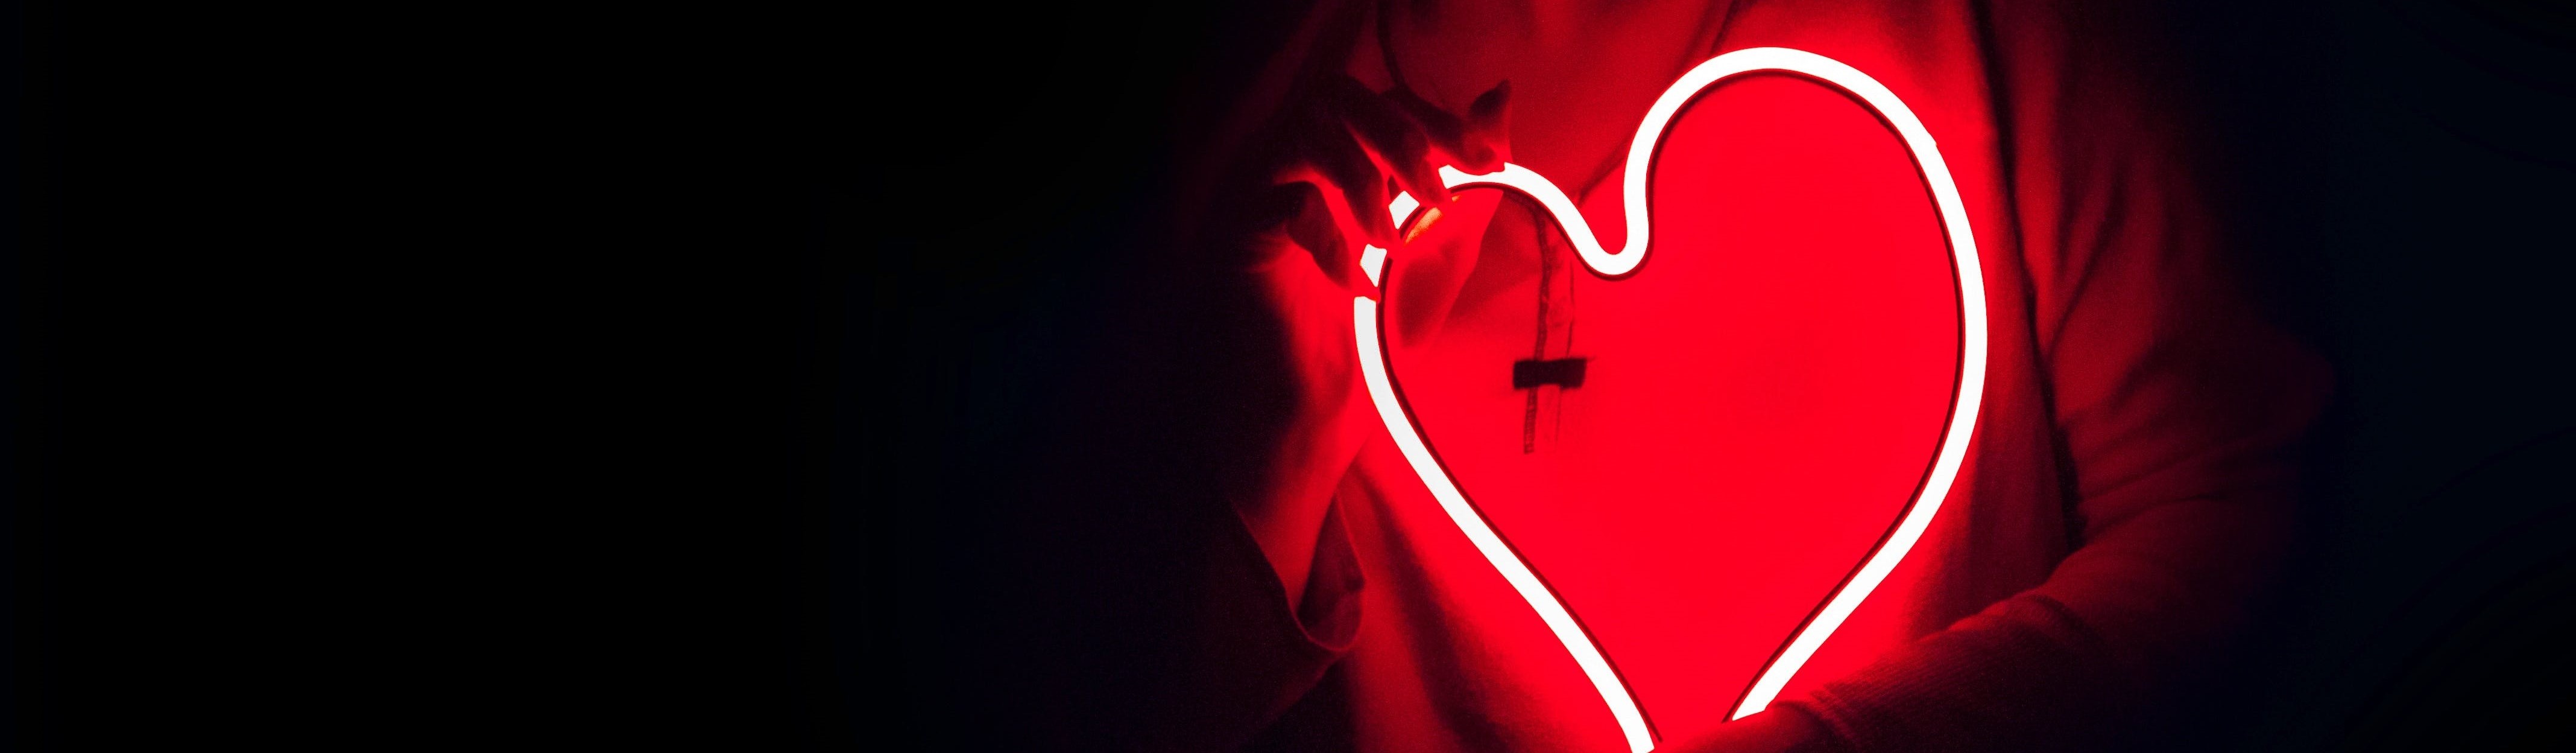 banner image of a person in the dark holding a heart shaped LED light at chest level. The light gives off a red glow.